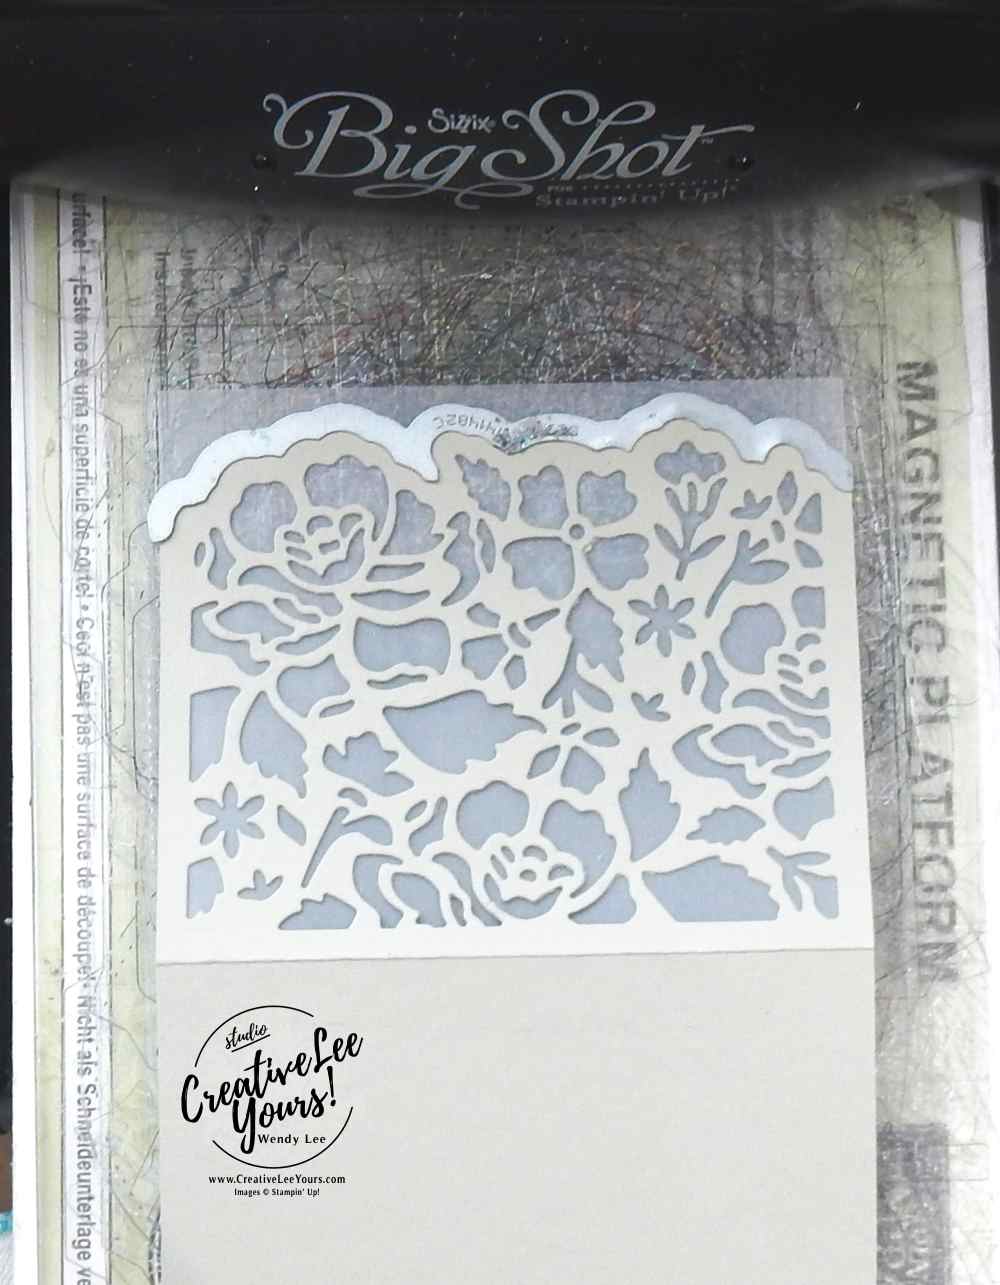 Detailed Floral Wedding by Wendy Lee, Stampin Up, #creativeleeyours, creatively yours, kylie bertucci international highlights, falling for you stamp set, detailed floral thinlits, hand made wedding card, anniversary